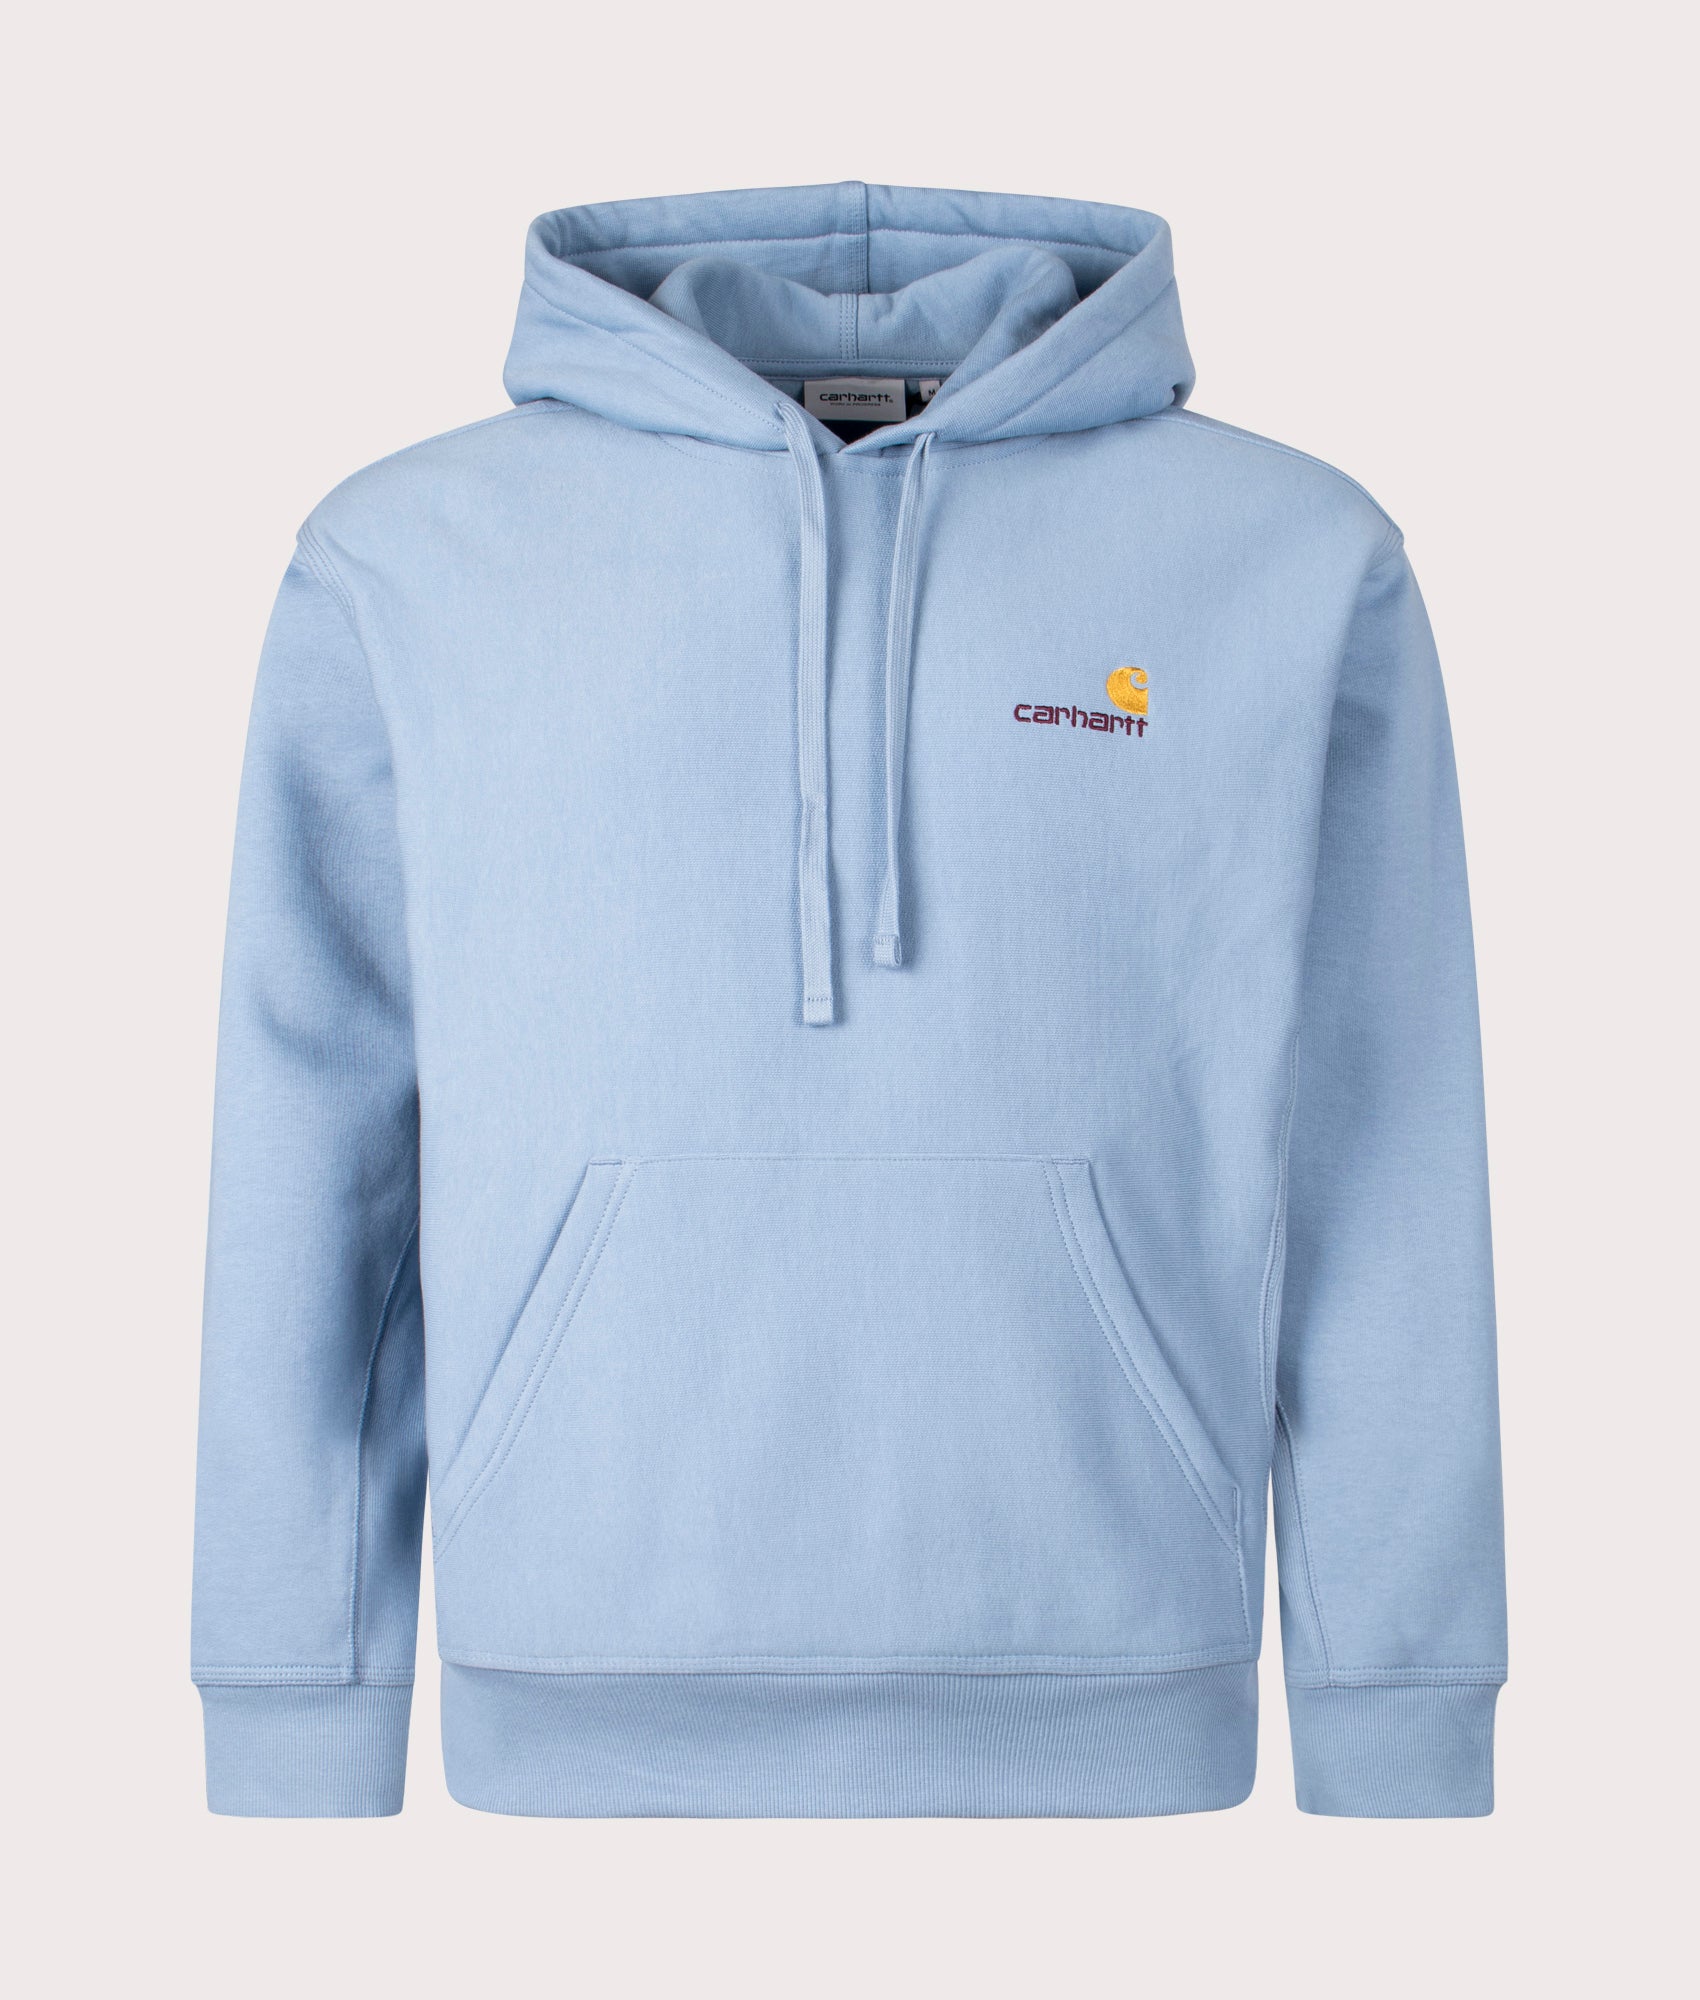 Carhartt WIP Mens Relaxed Fit American Script Hoodie - Colour: 0F4XX Frosted Blue - Size: Medium